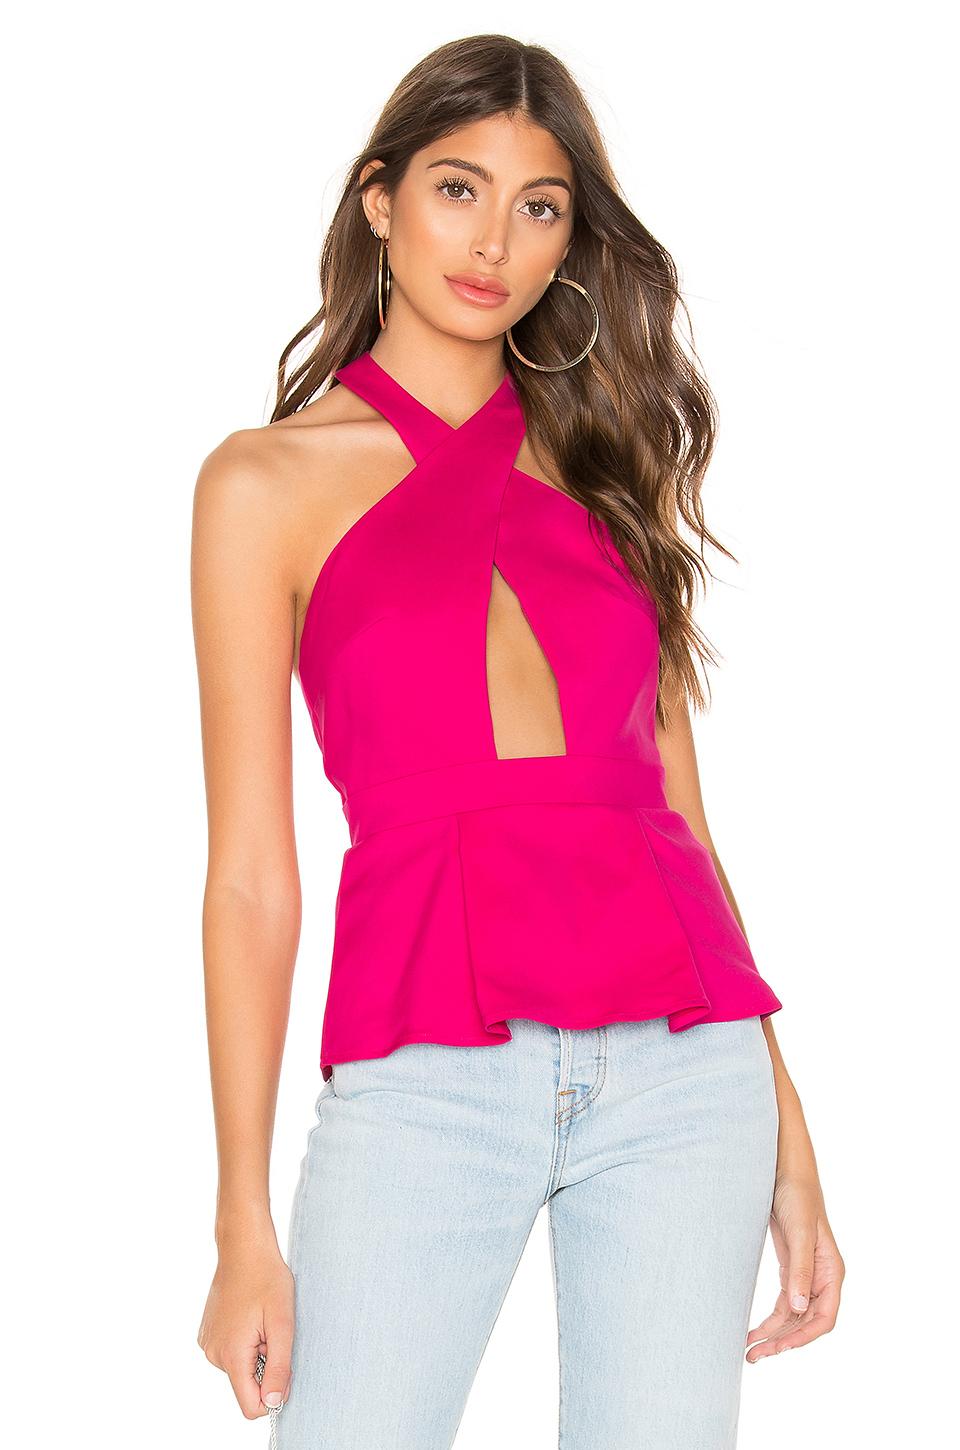 superdown Synthetic Shanet Peplum Top in Hot Pink (Pink) - Lyst